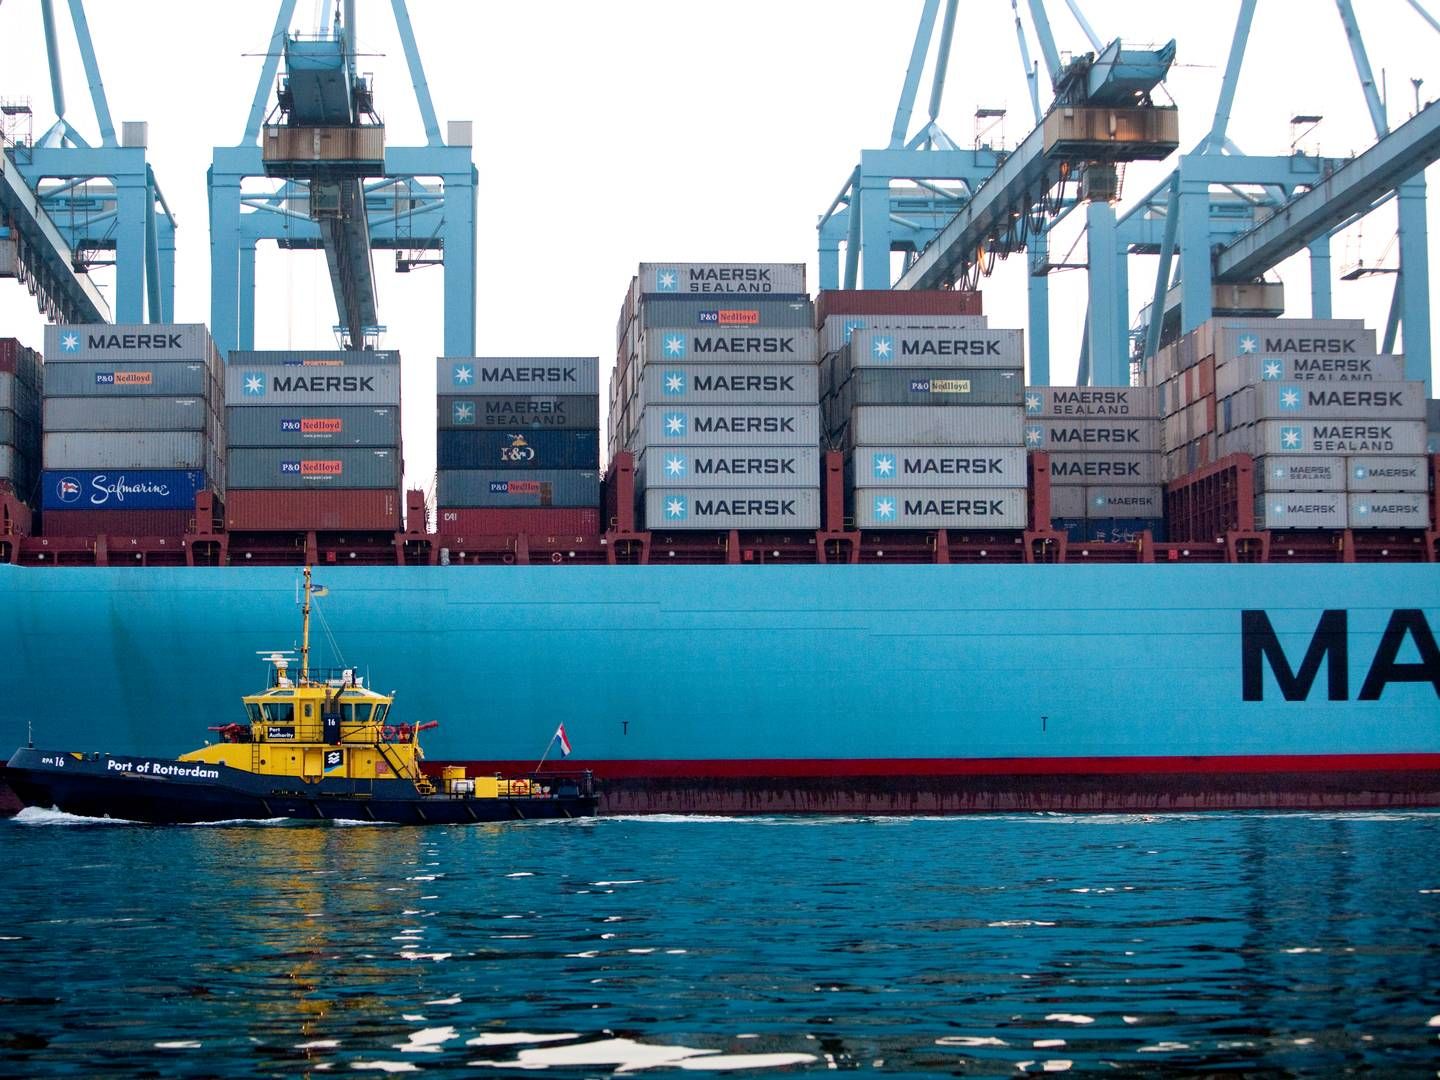 On July 13, customs authorities in the port of Rotterdam seized a record-breaking eight tonnes of cocaine in a Maersk container. File photo. | Photo: Mie Brinkmann